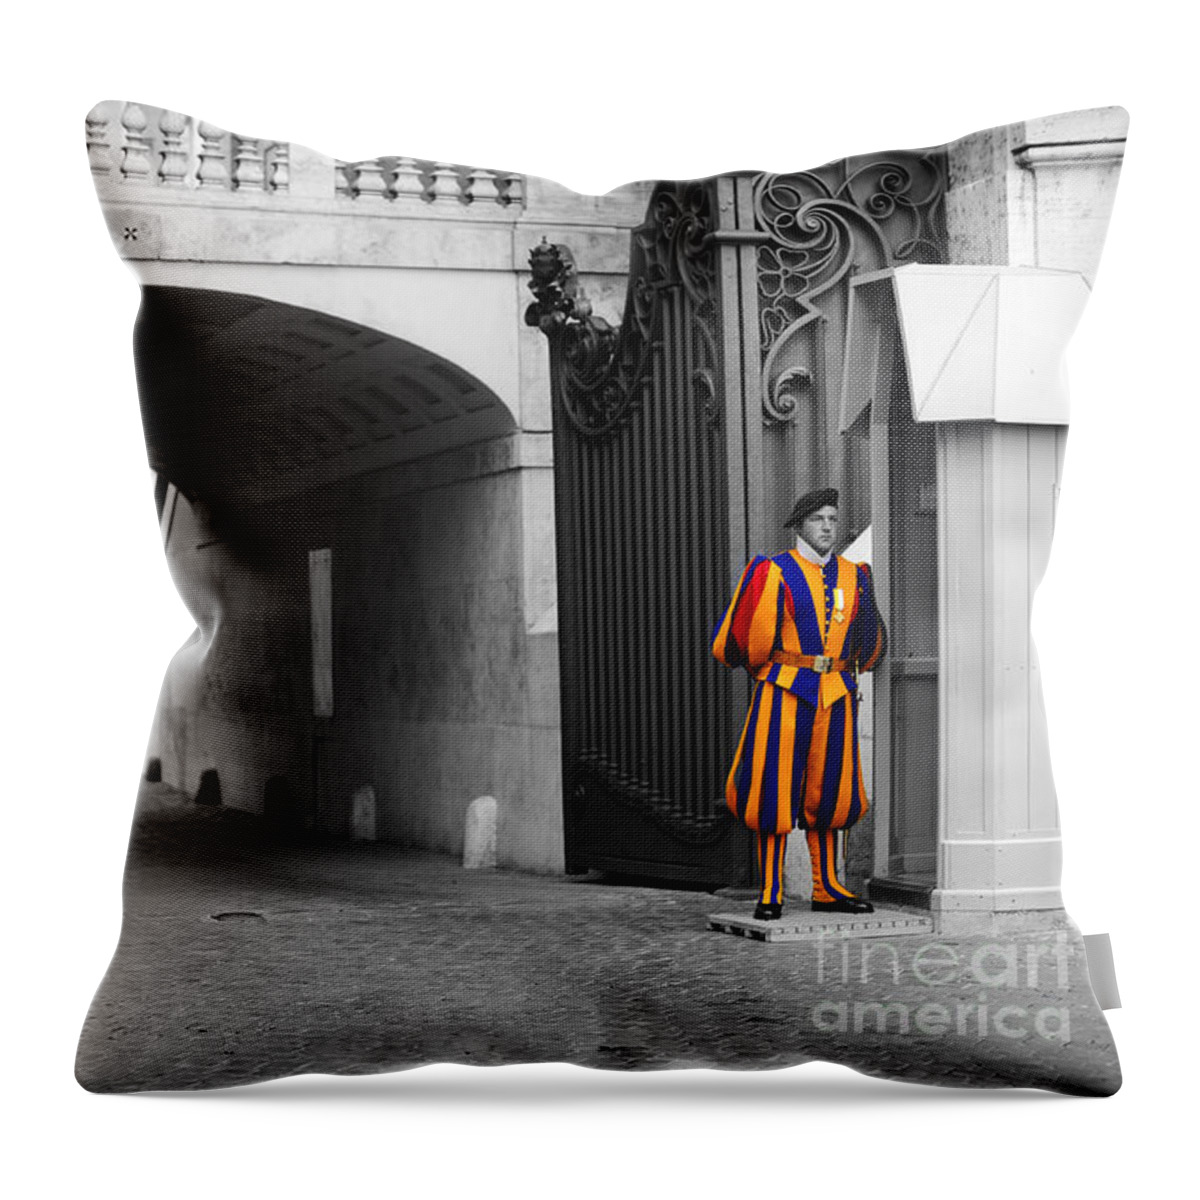 Swiss Guard Throw Pillow featuring the photograph Vatican Swiss Guard by Stefano Senise